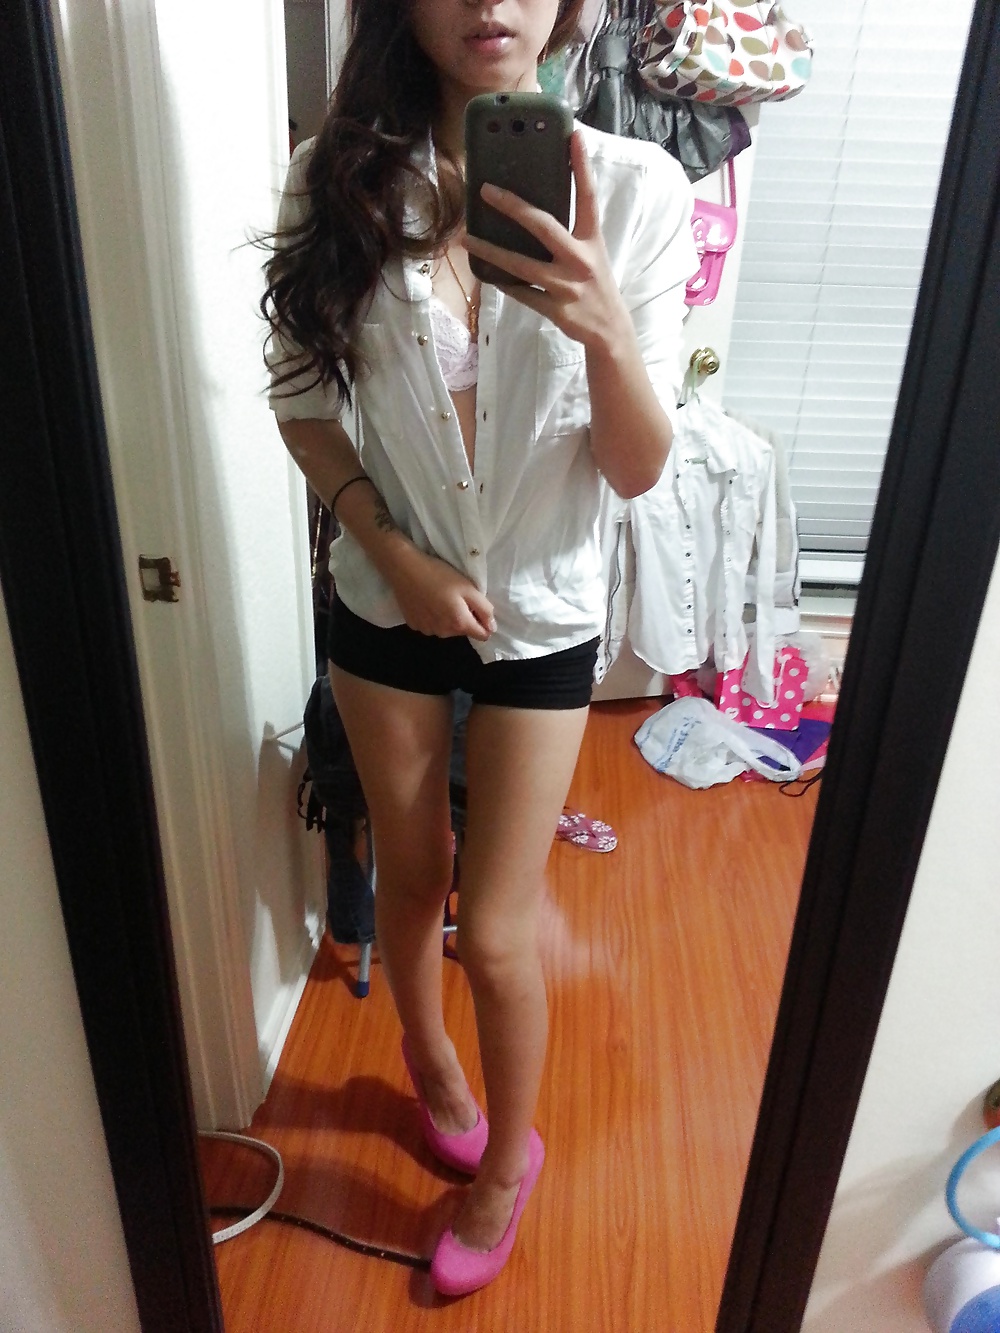 Amateurs Asian Delights 22 - Cute selfshooter adult photos